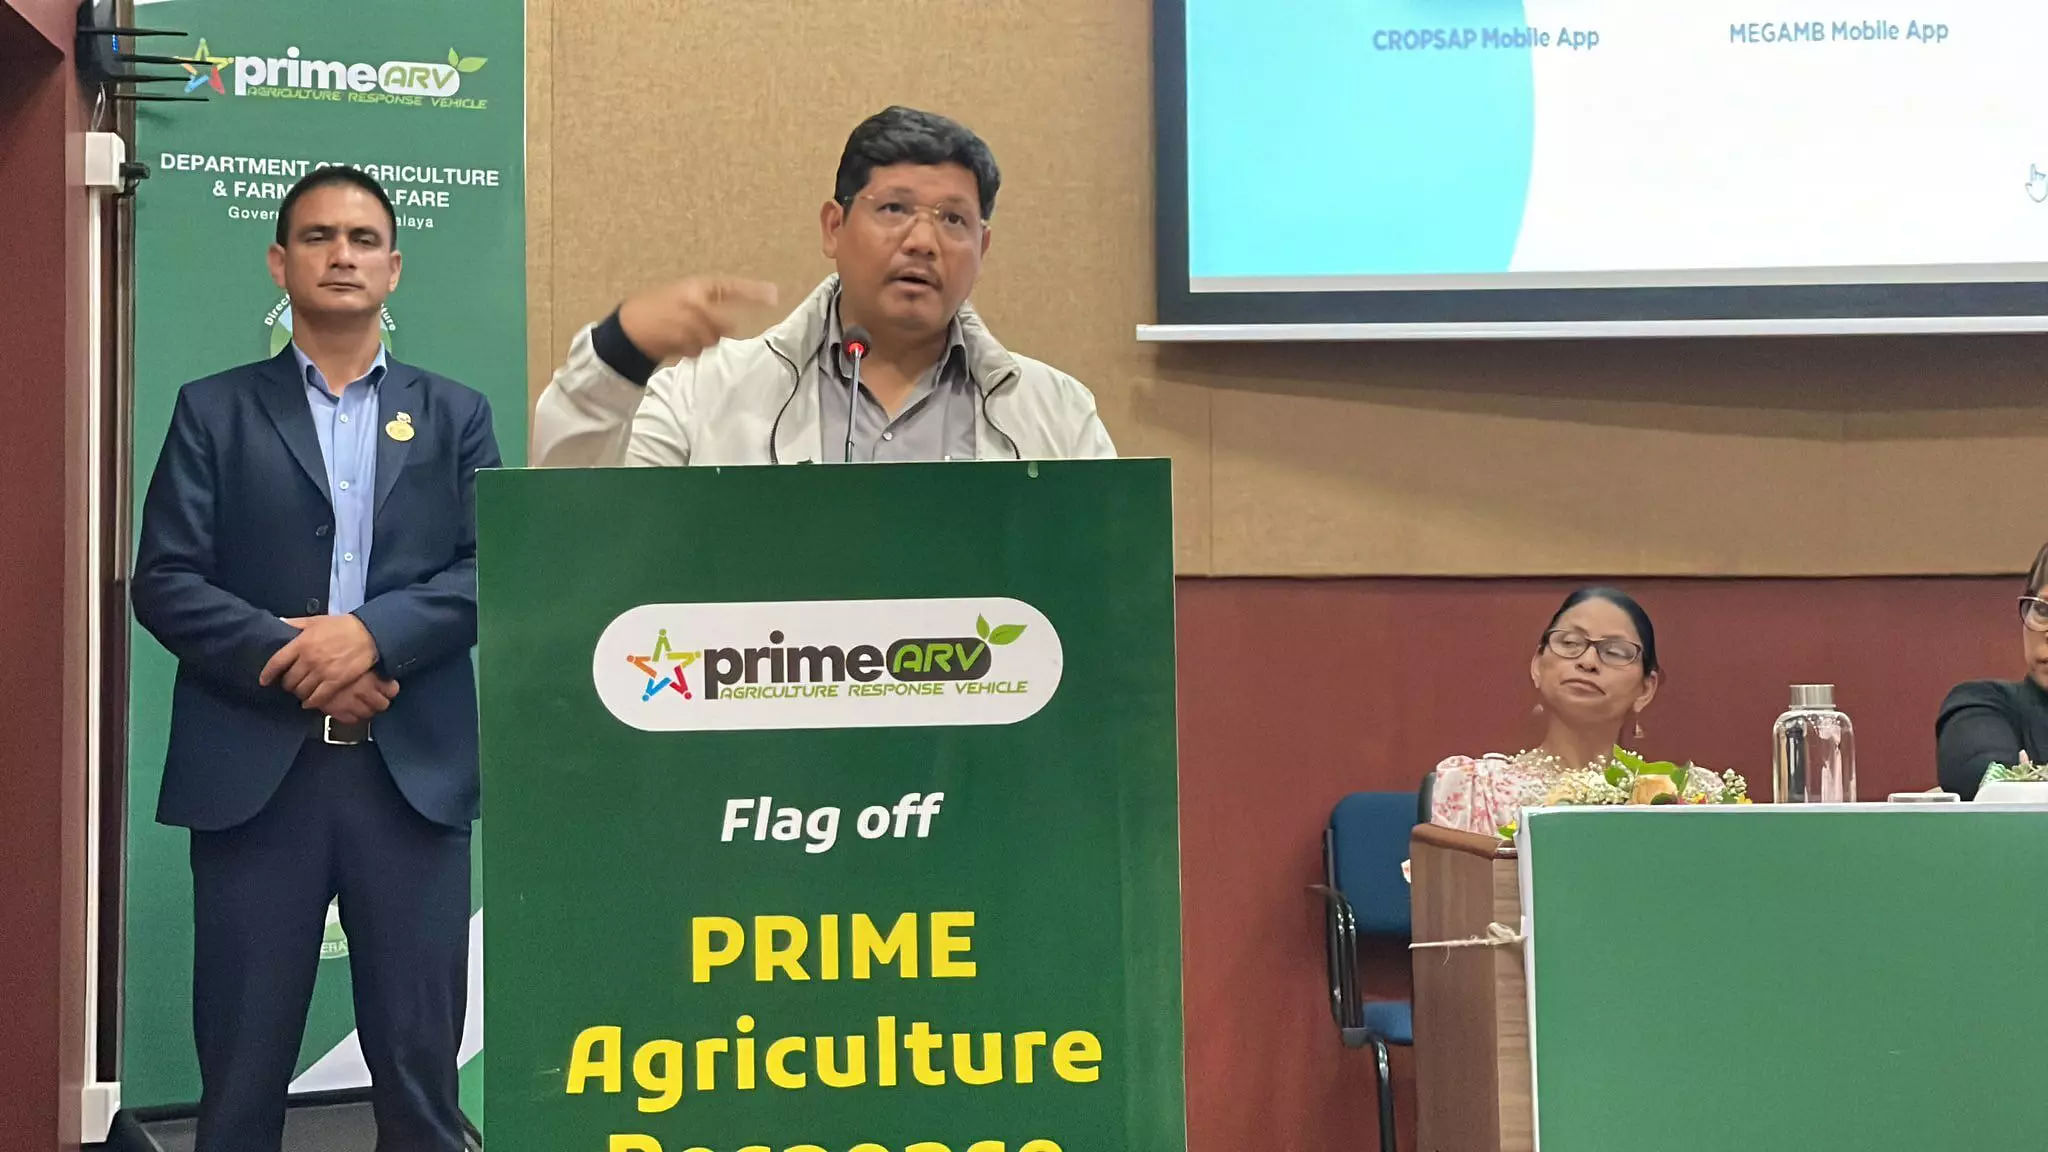 Meghalaya: CM Conrad Sangma Launched 4 Apps to Benefit Farmers